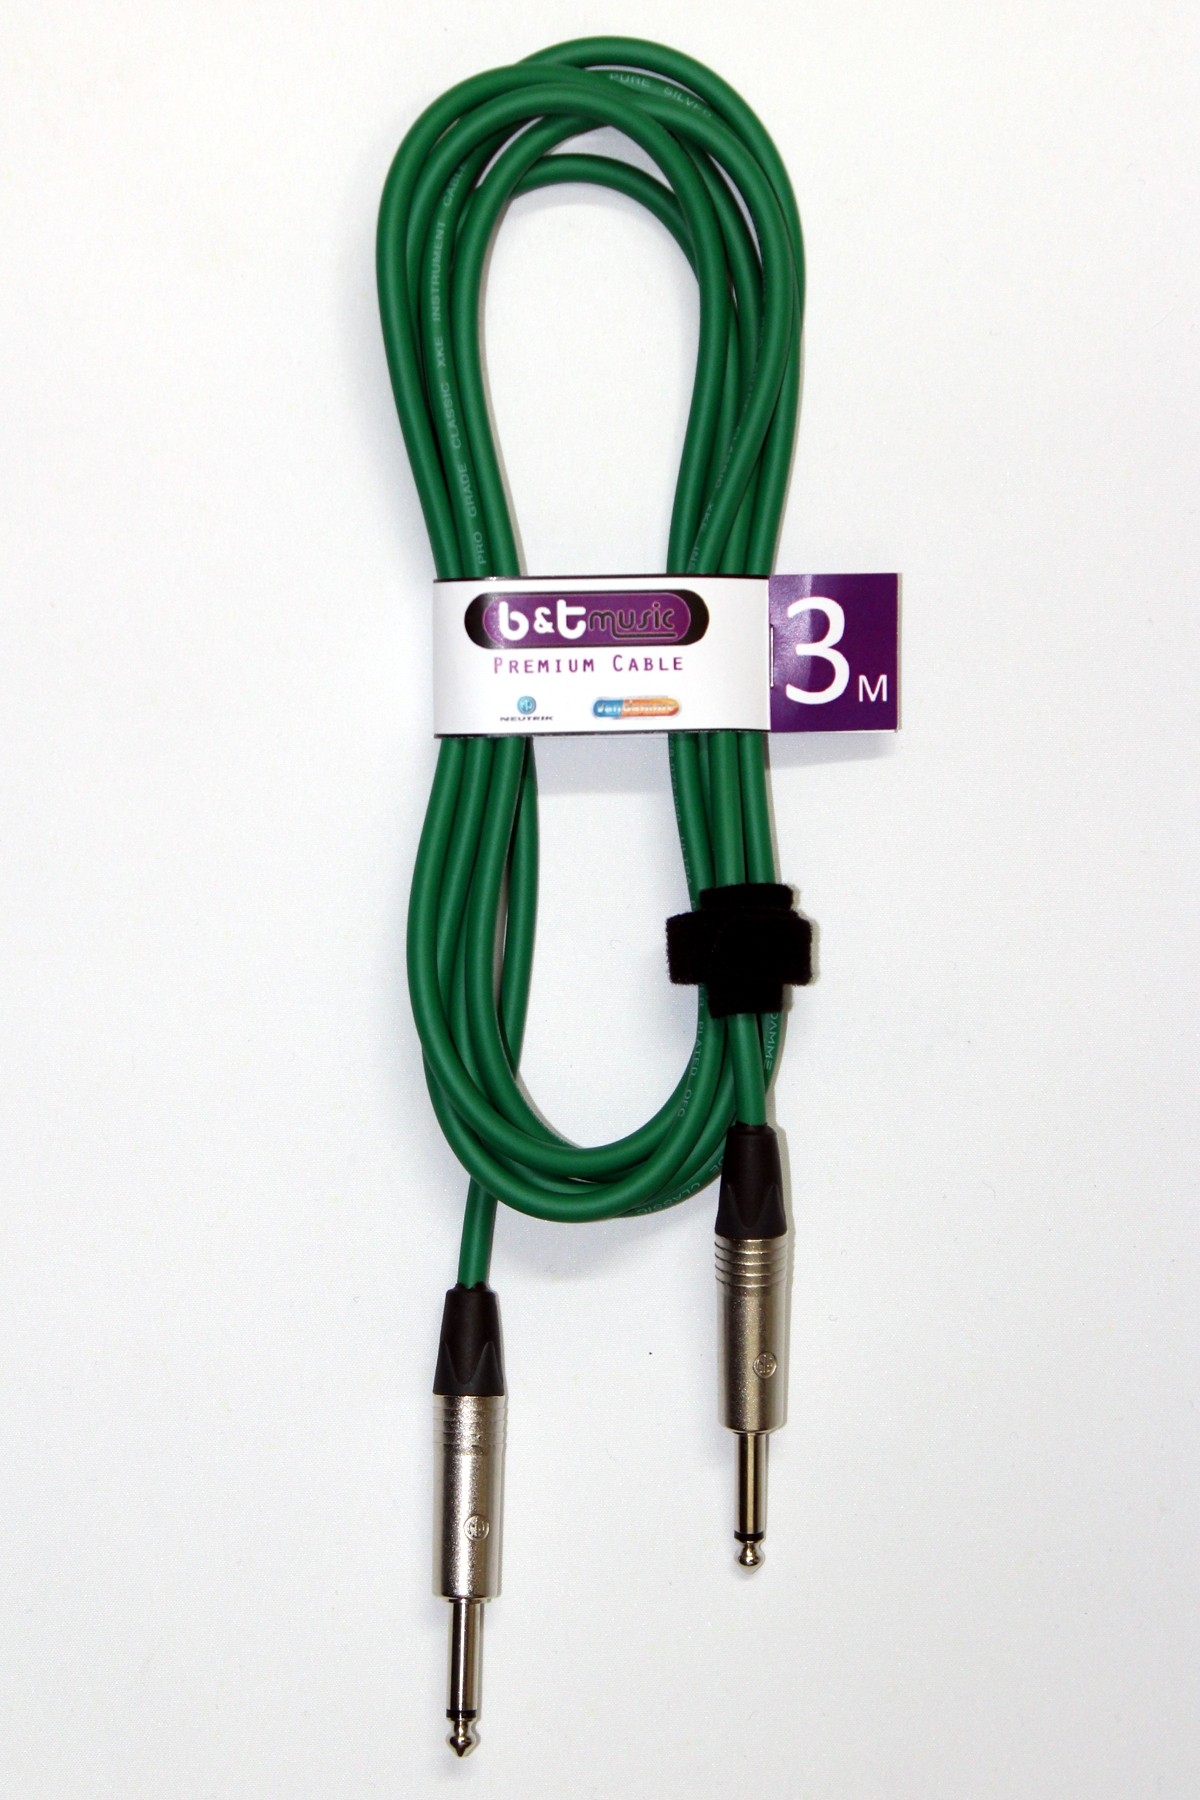 B&T Music Premium Cable 3m Jack To Jack - Green